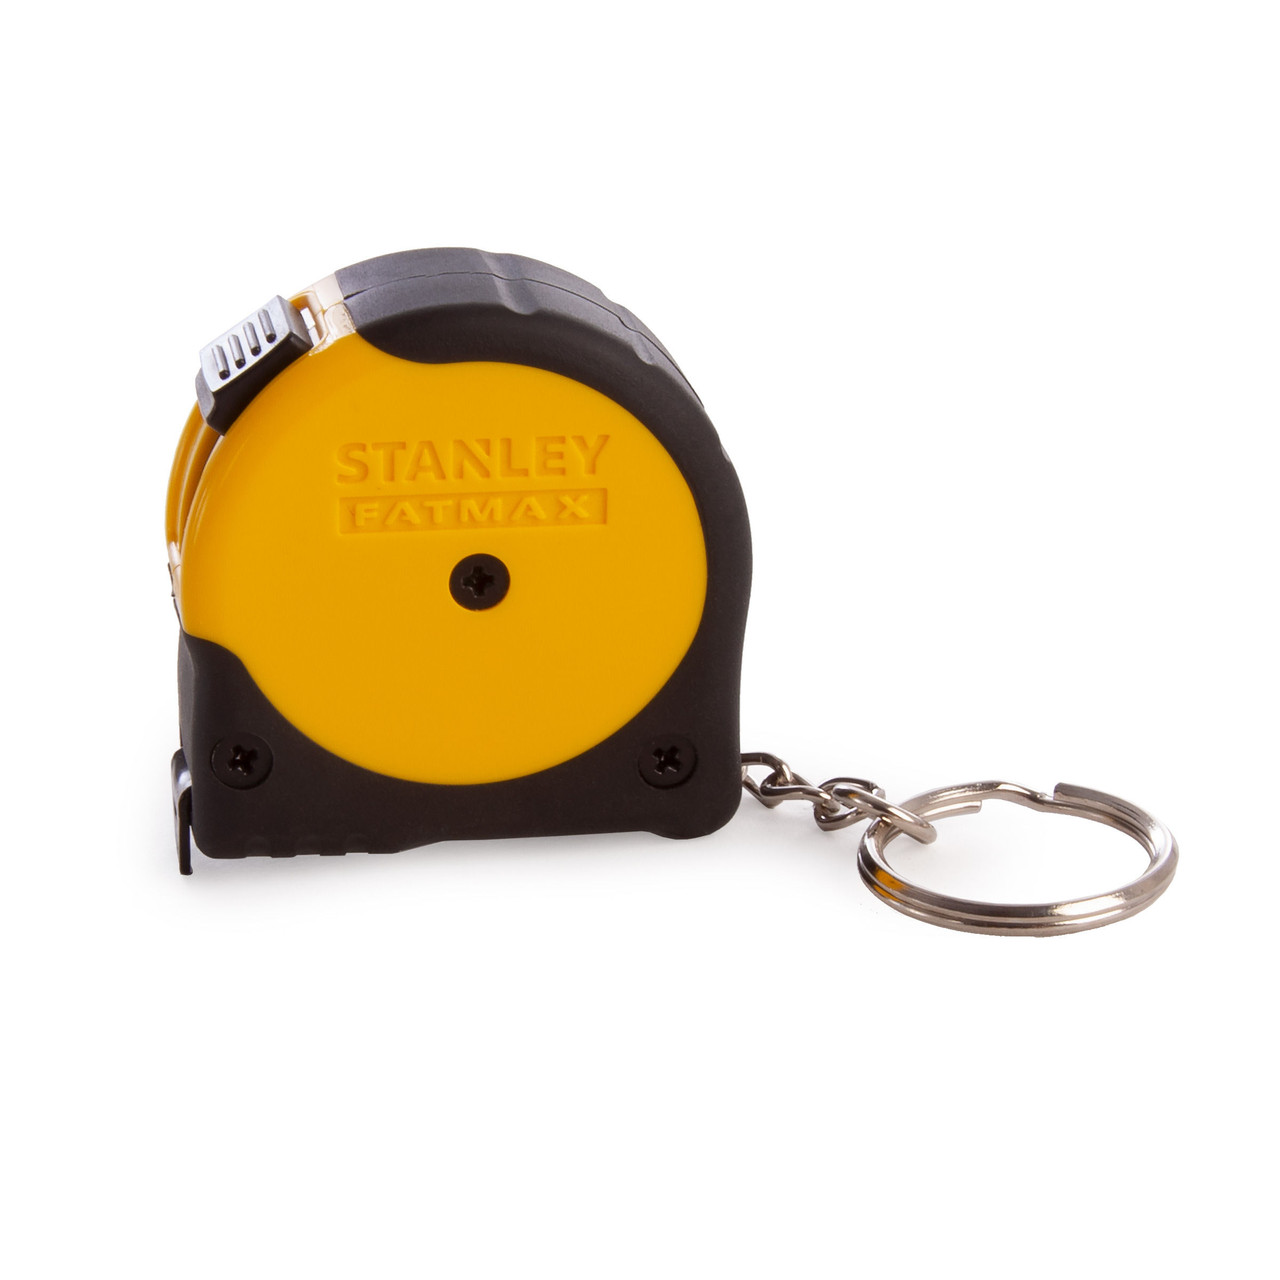 STANLEY FMHT1-33856 2M Fatmax Tape Measure With Keychain (36 pcs